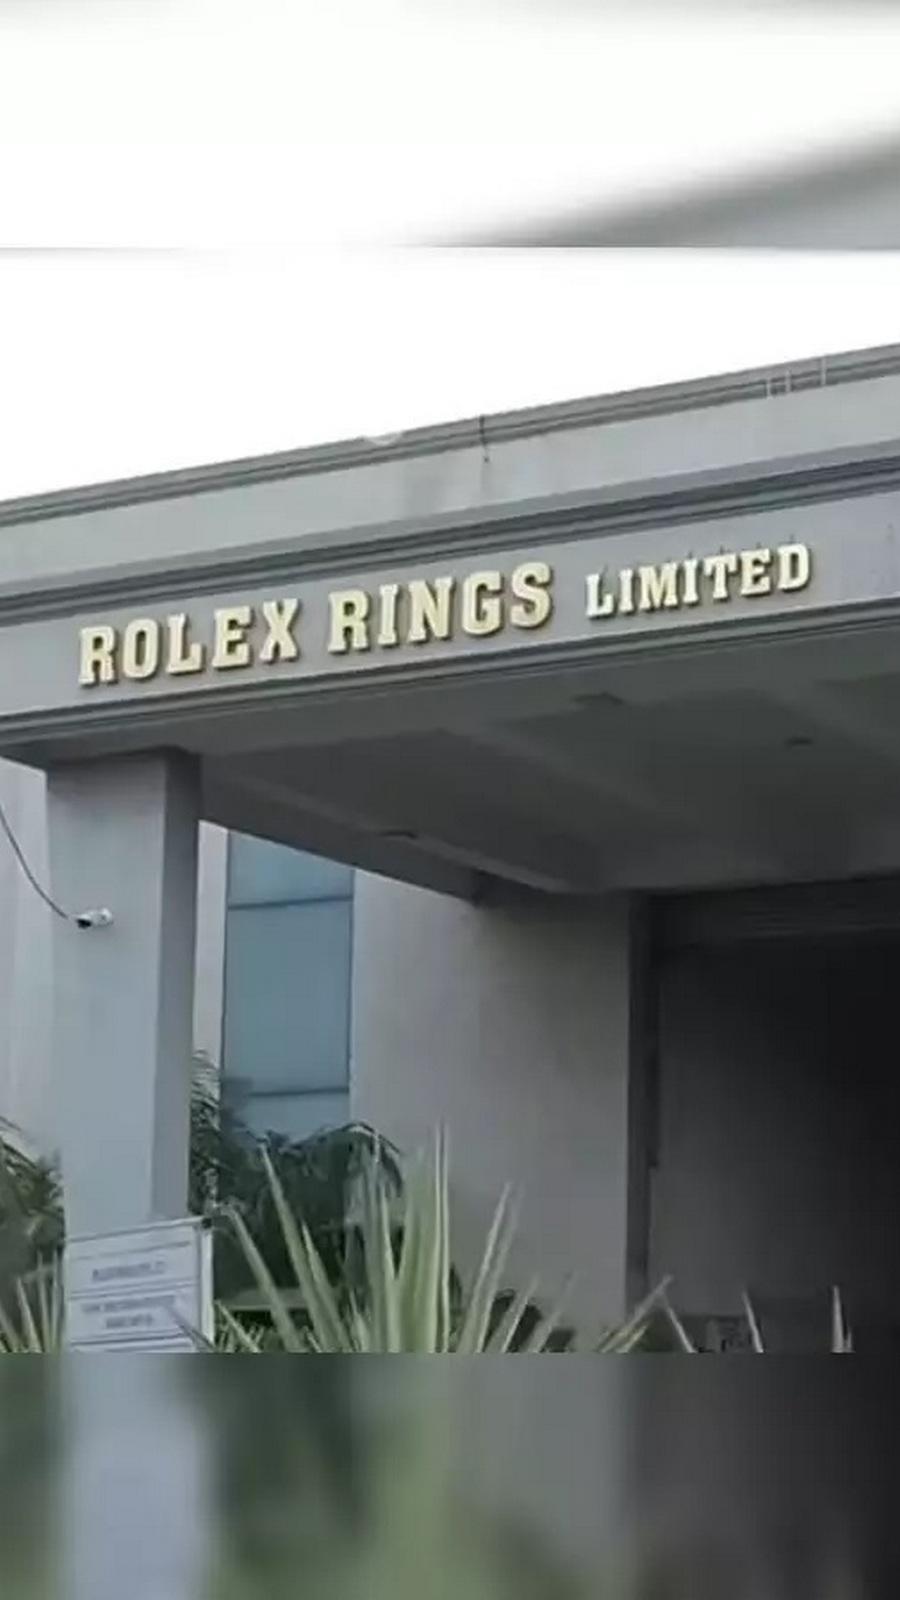 Machining Facility in Rajkot, India - Rolex Rolled Rings